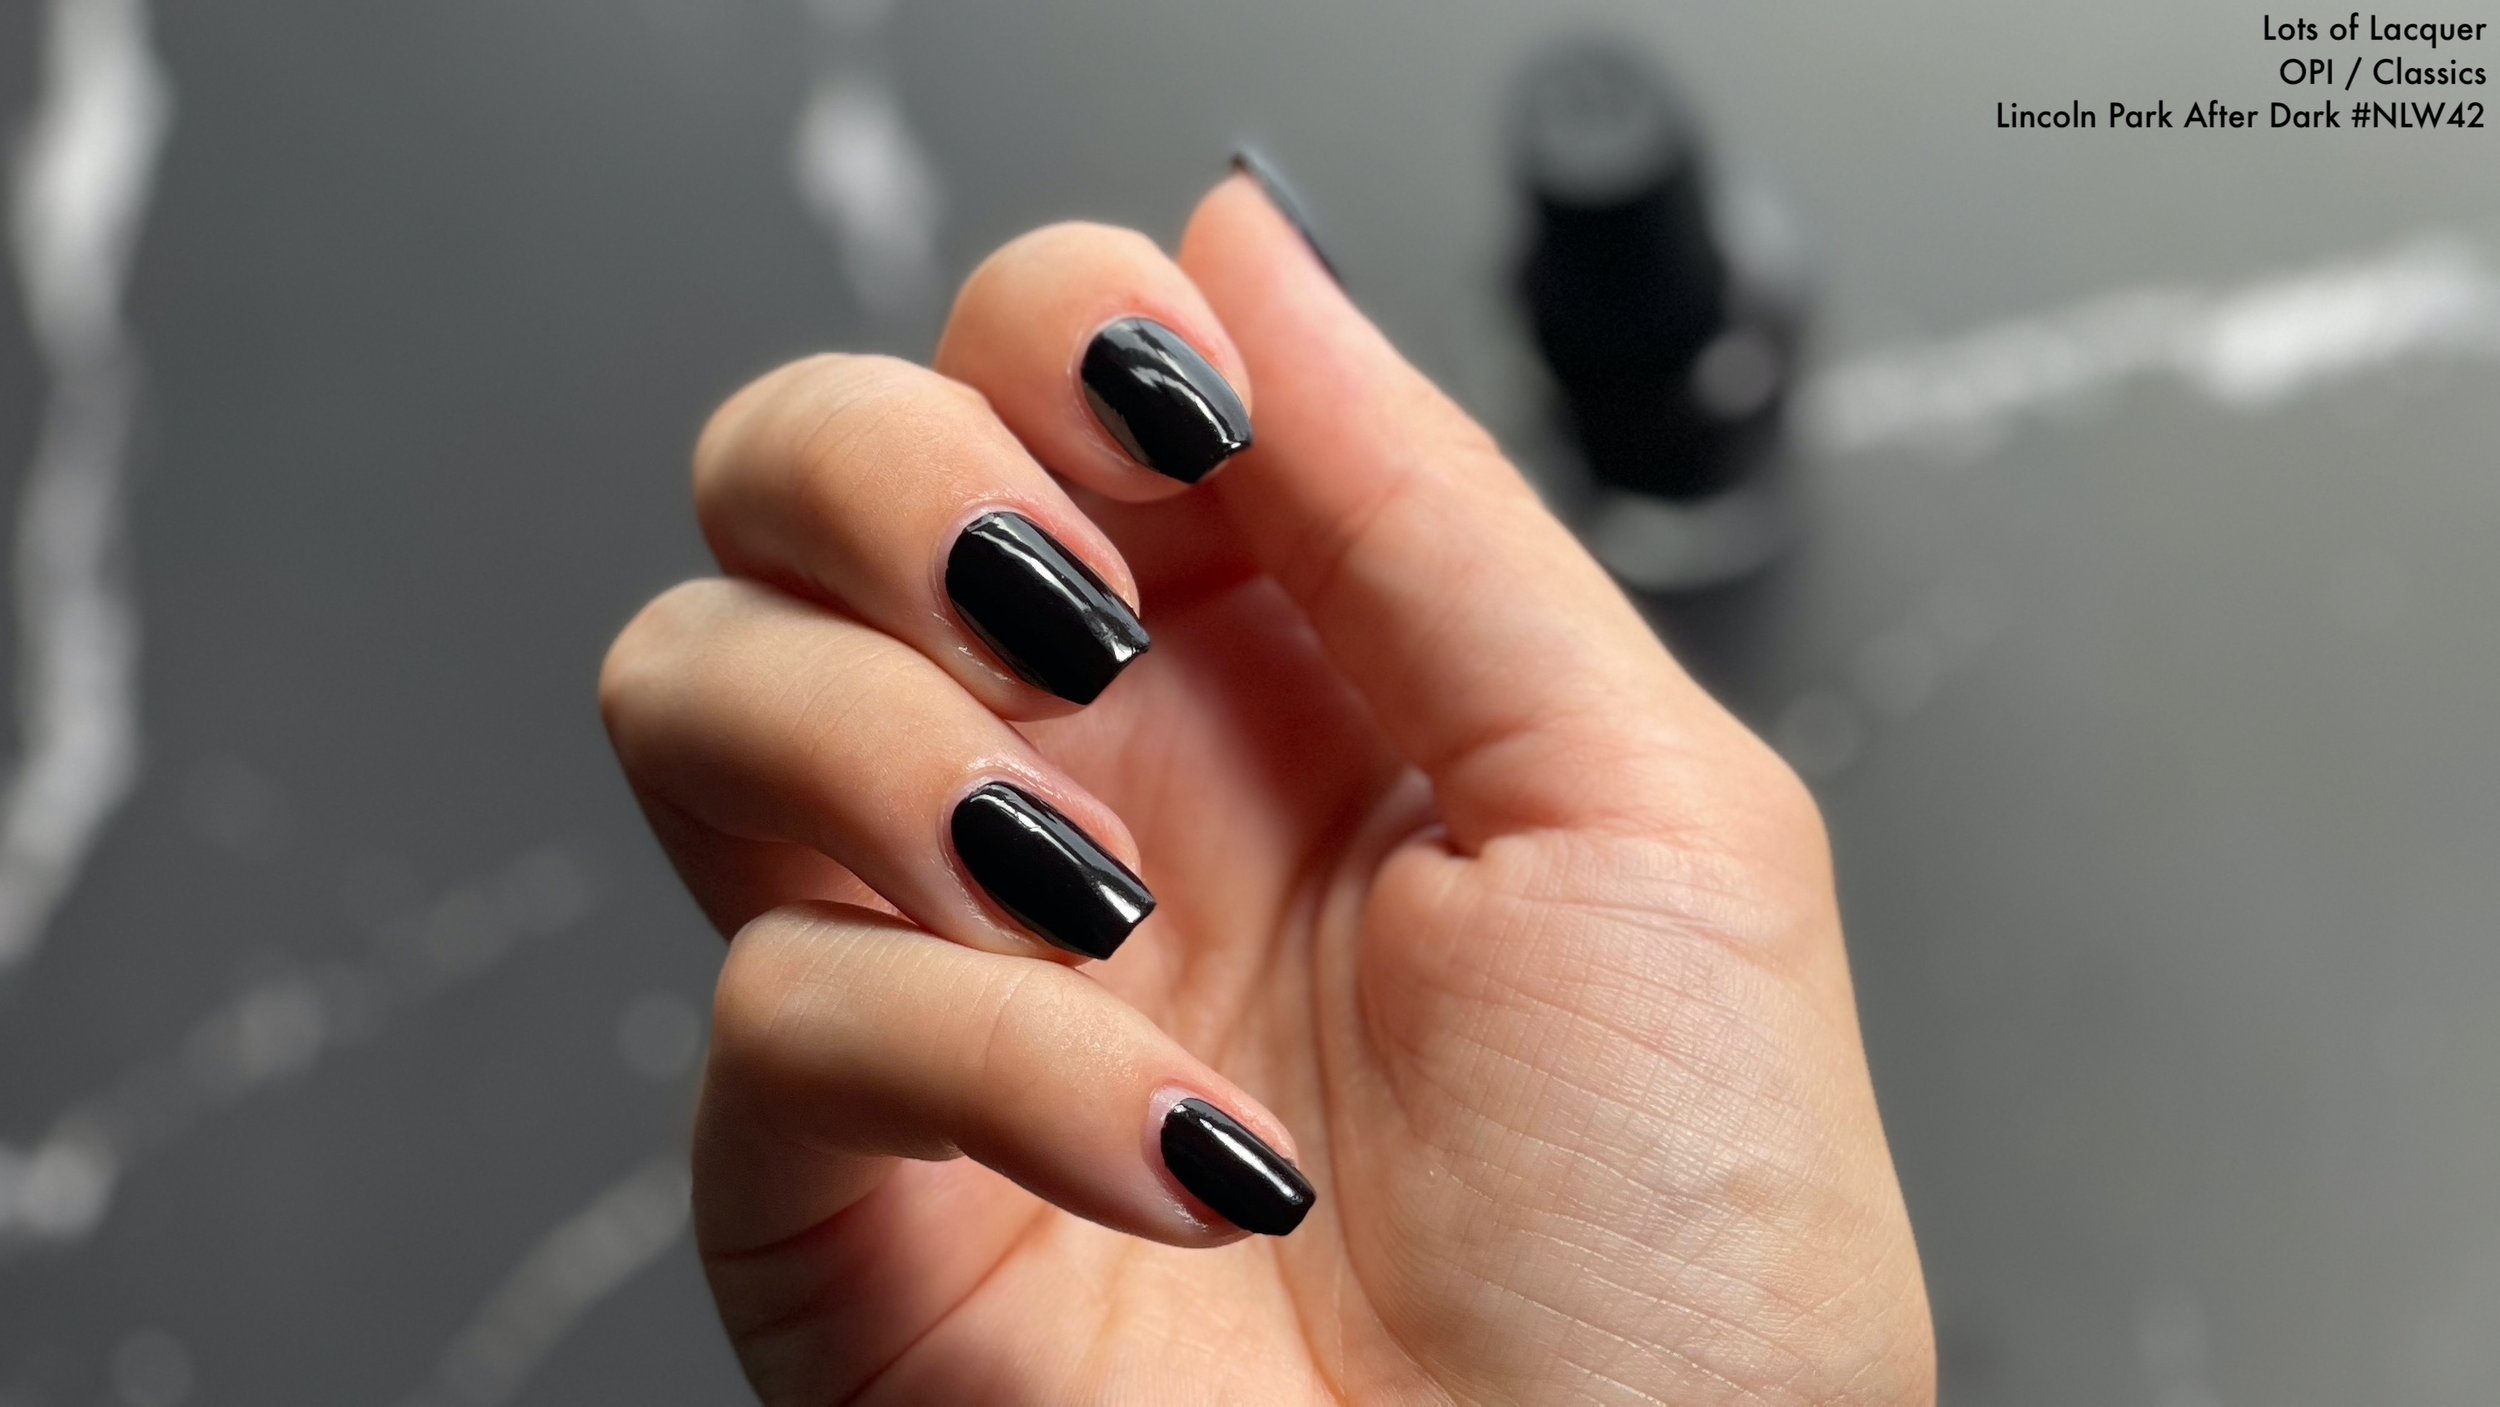 1. OPI Nail Lacquer in "Lincoln Park After Dark" - wide 8